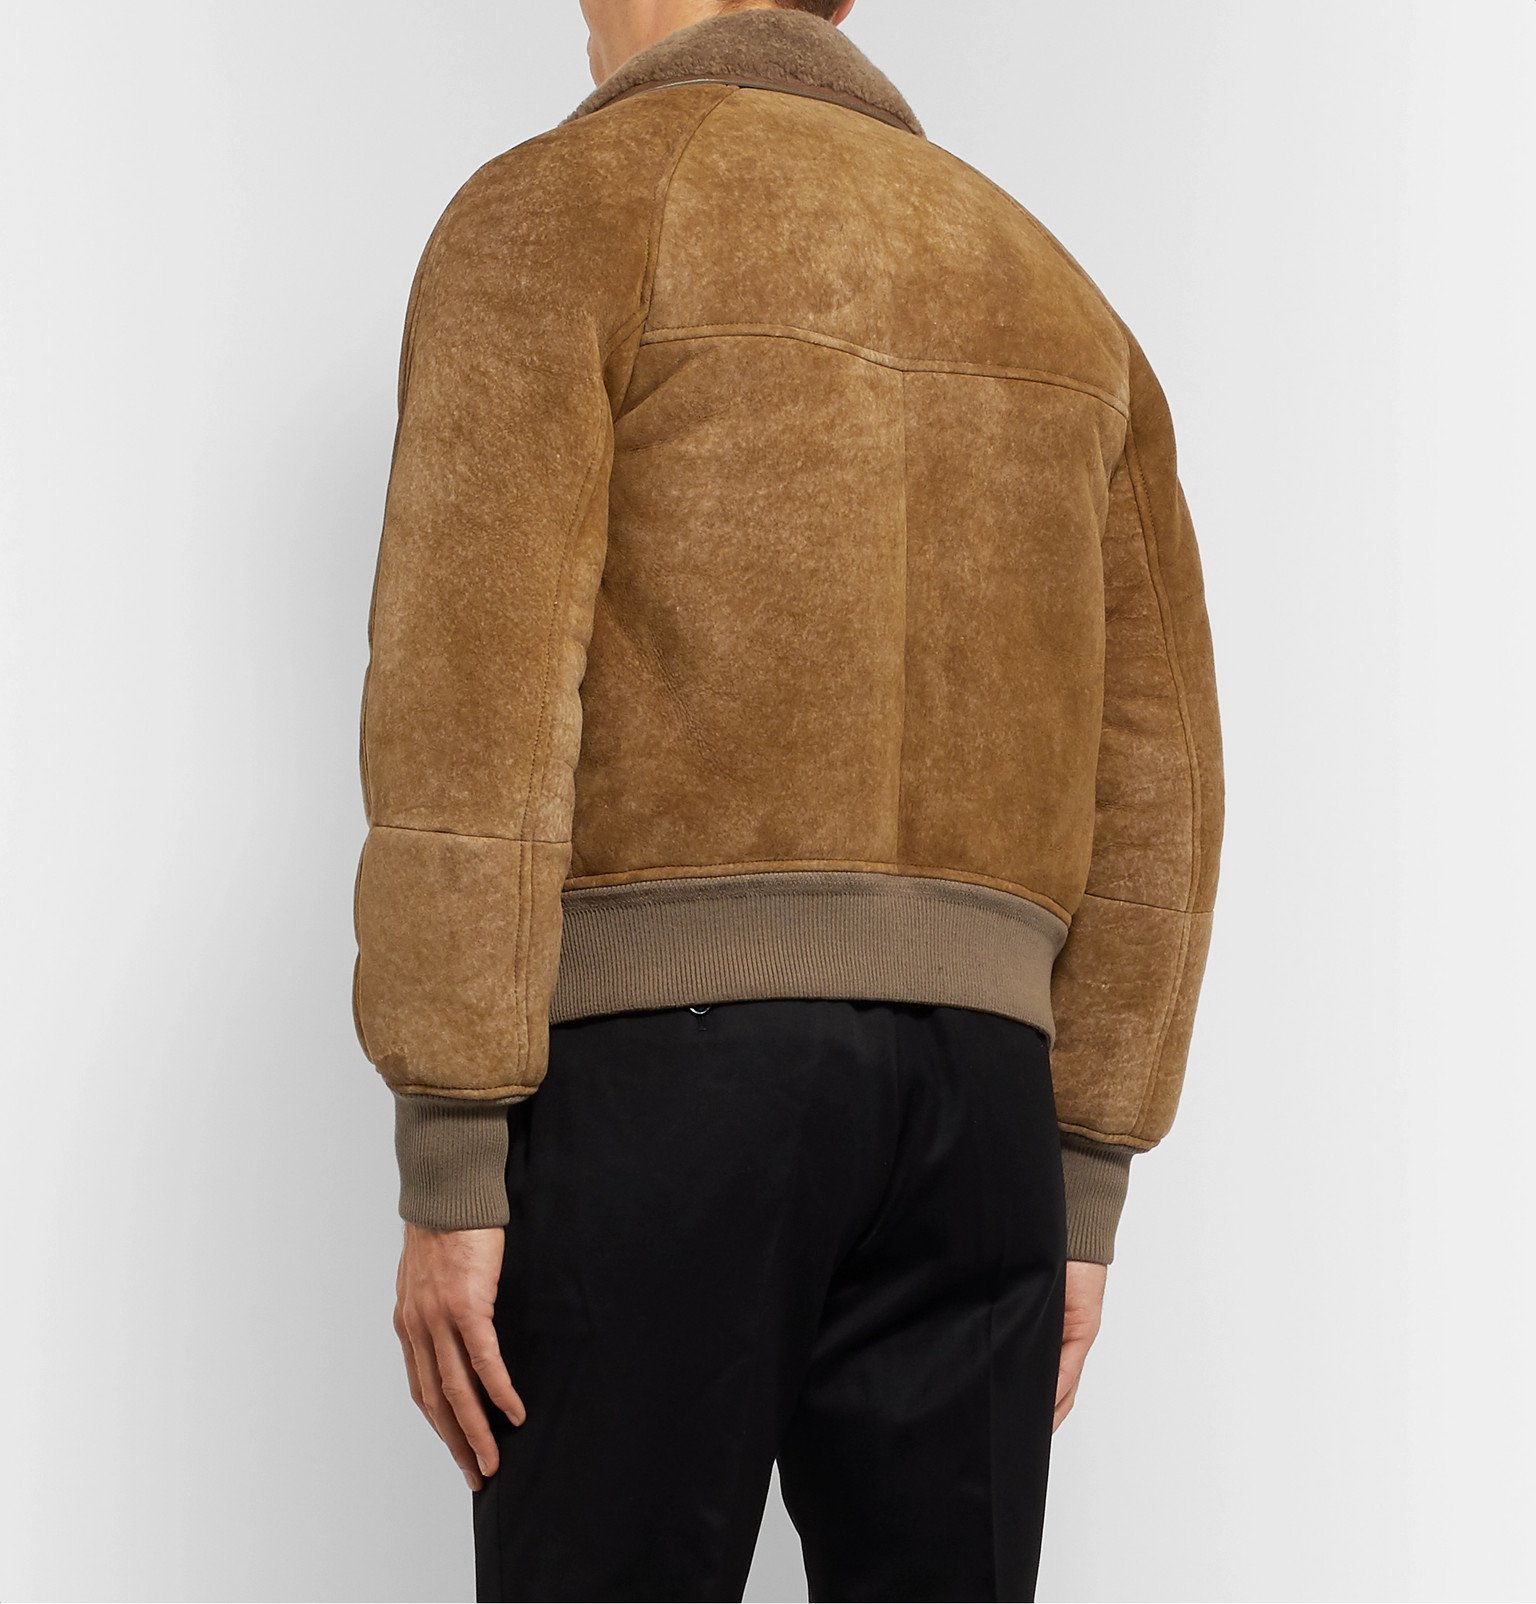 TOM FORD - Shearling Bomber Jacket - Brown TOM FORD